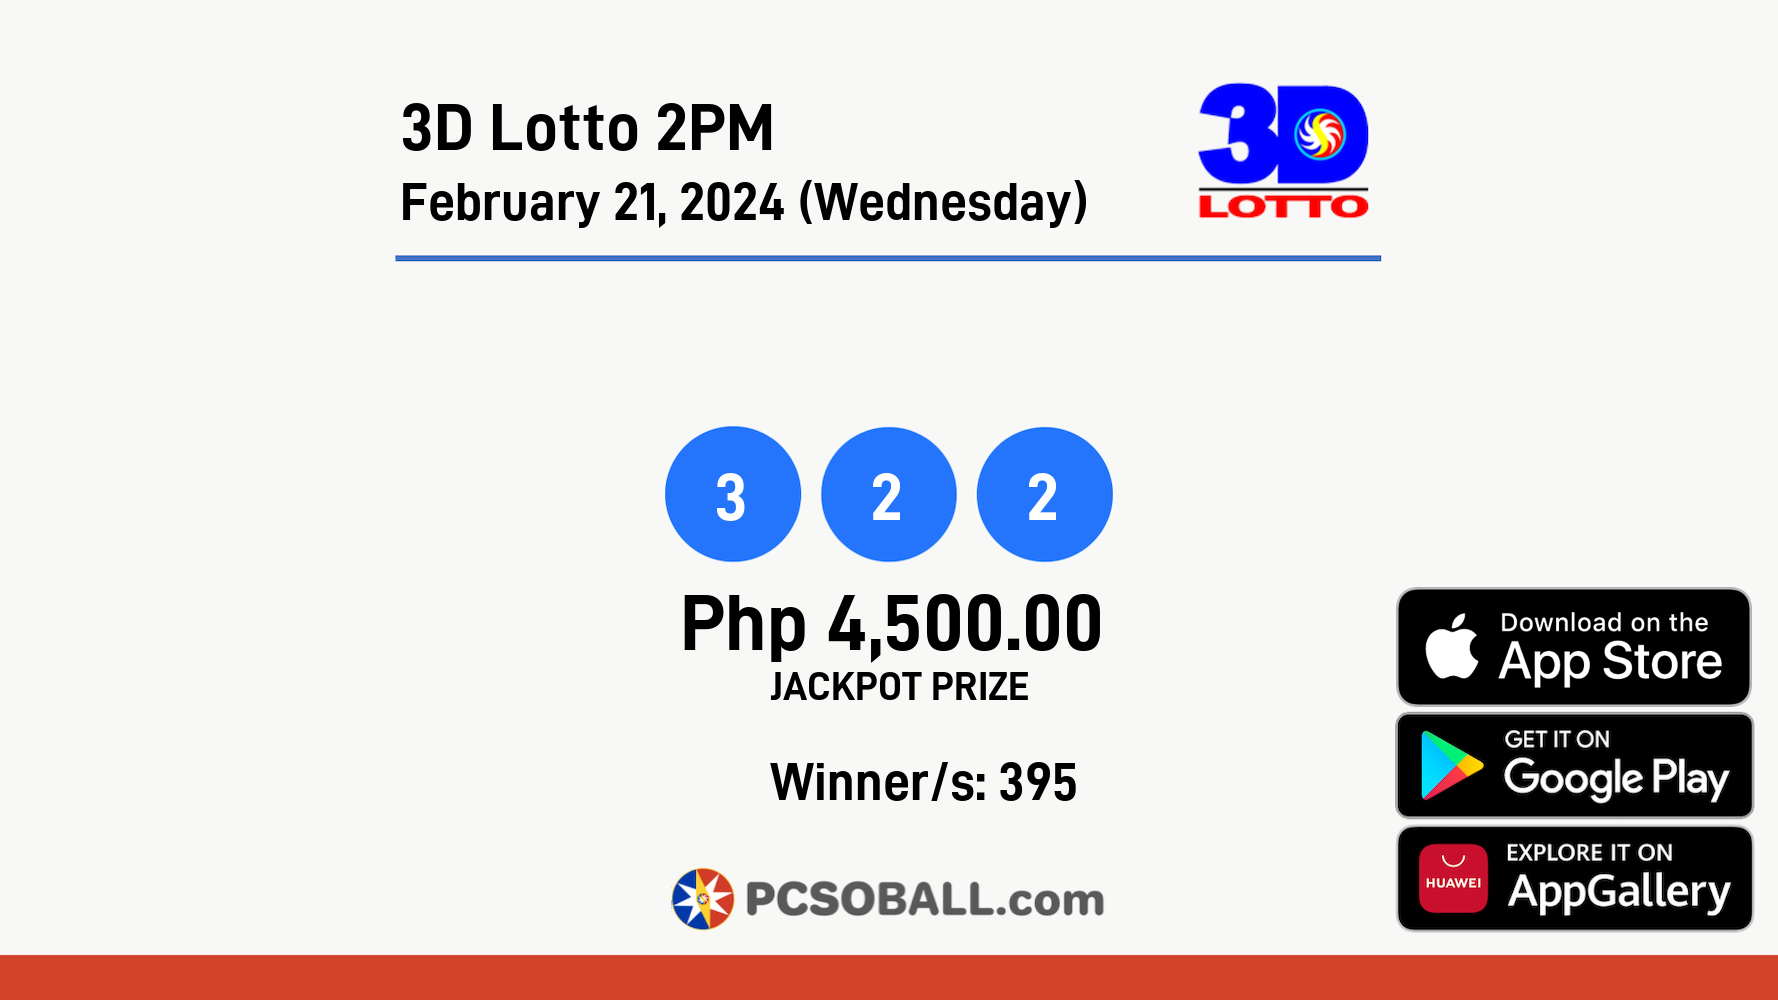 3D Lotto 2PM February 21, 2024 (Wednesday) Result